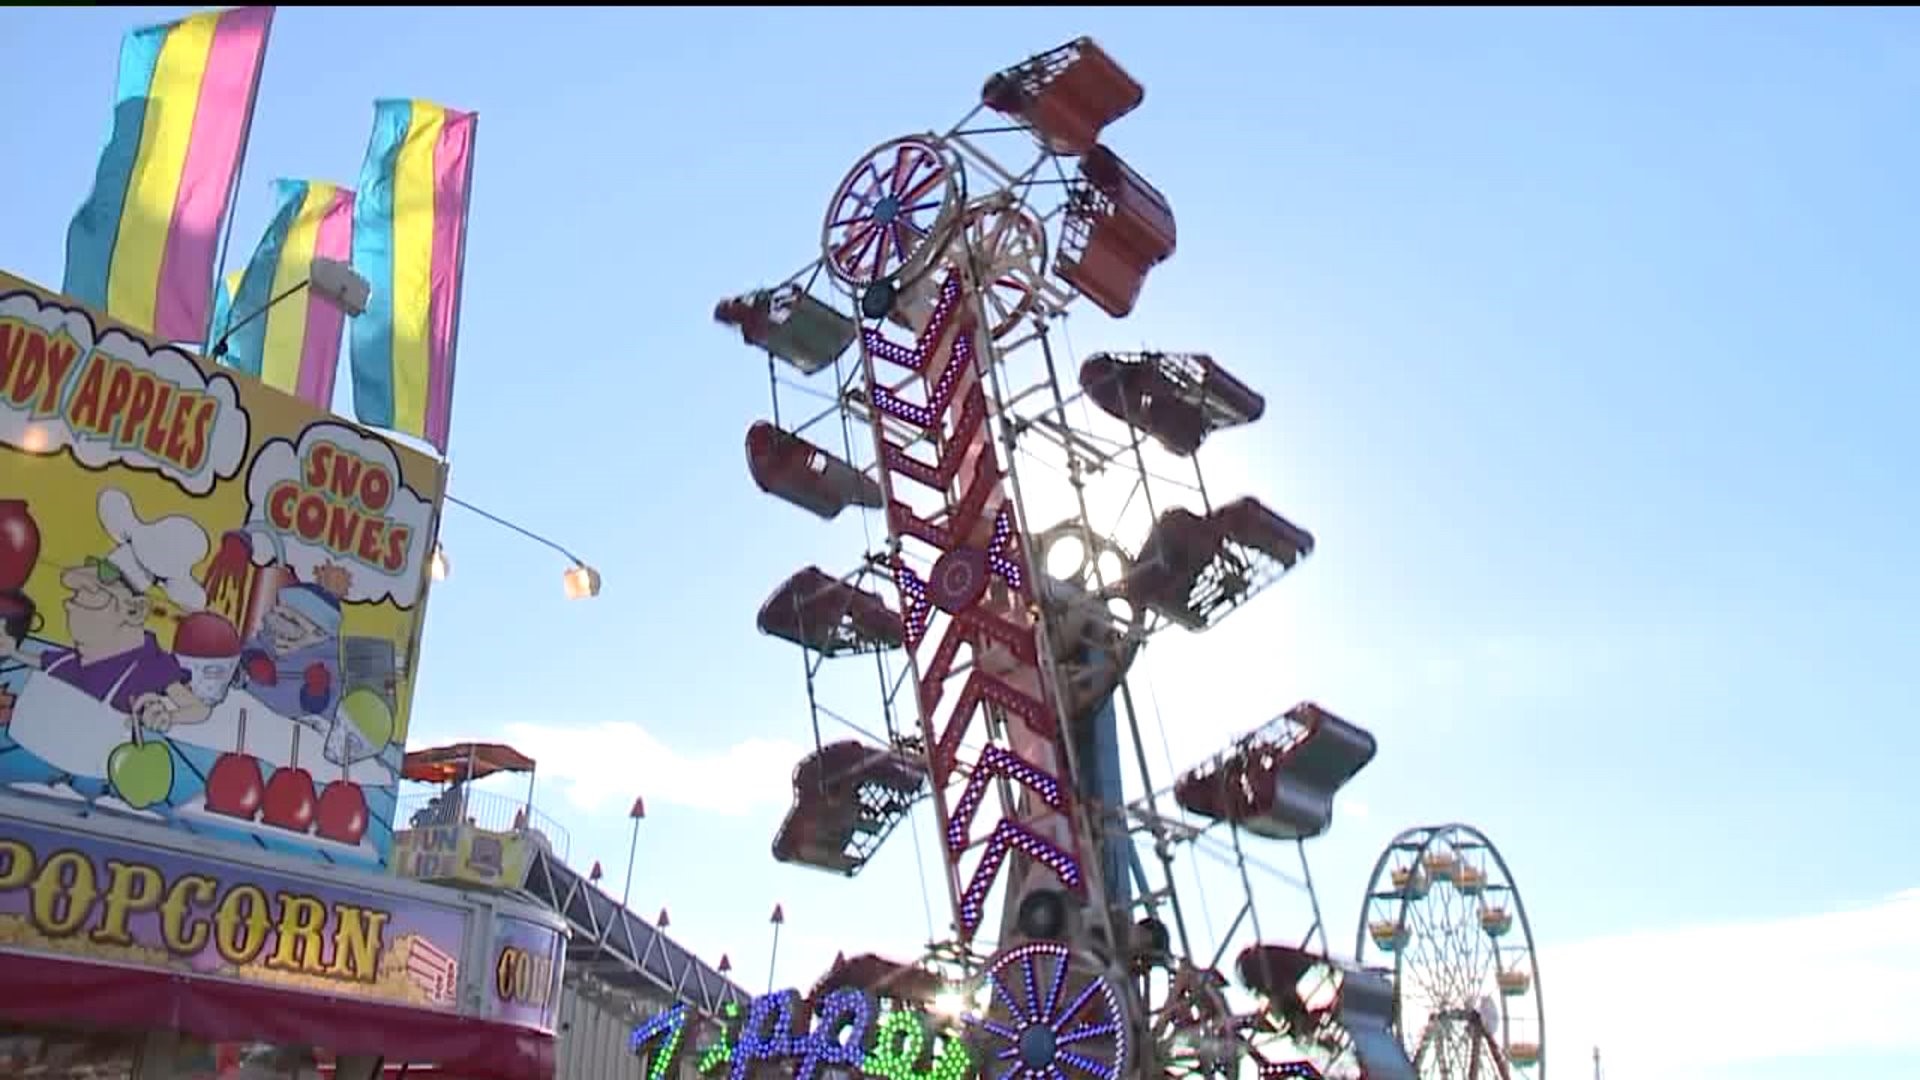 Staple of Summer Northeast Fair Canceled This Year